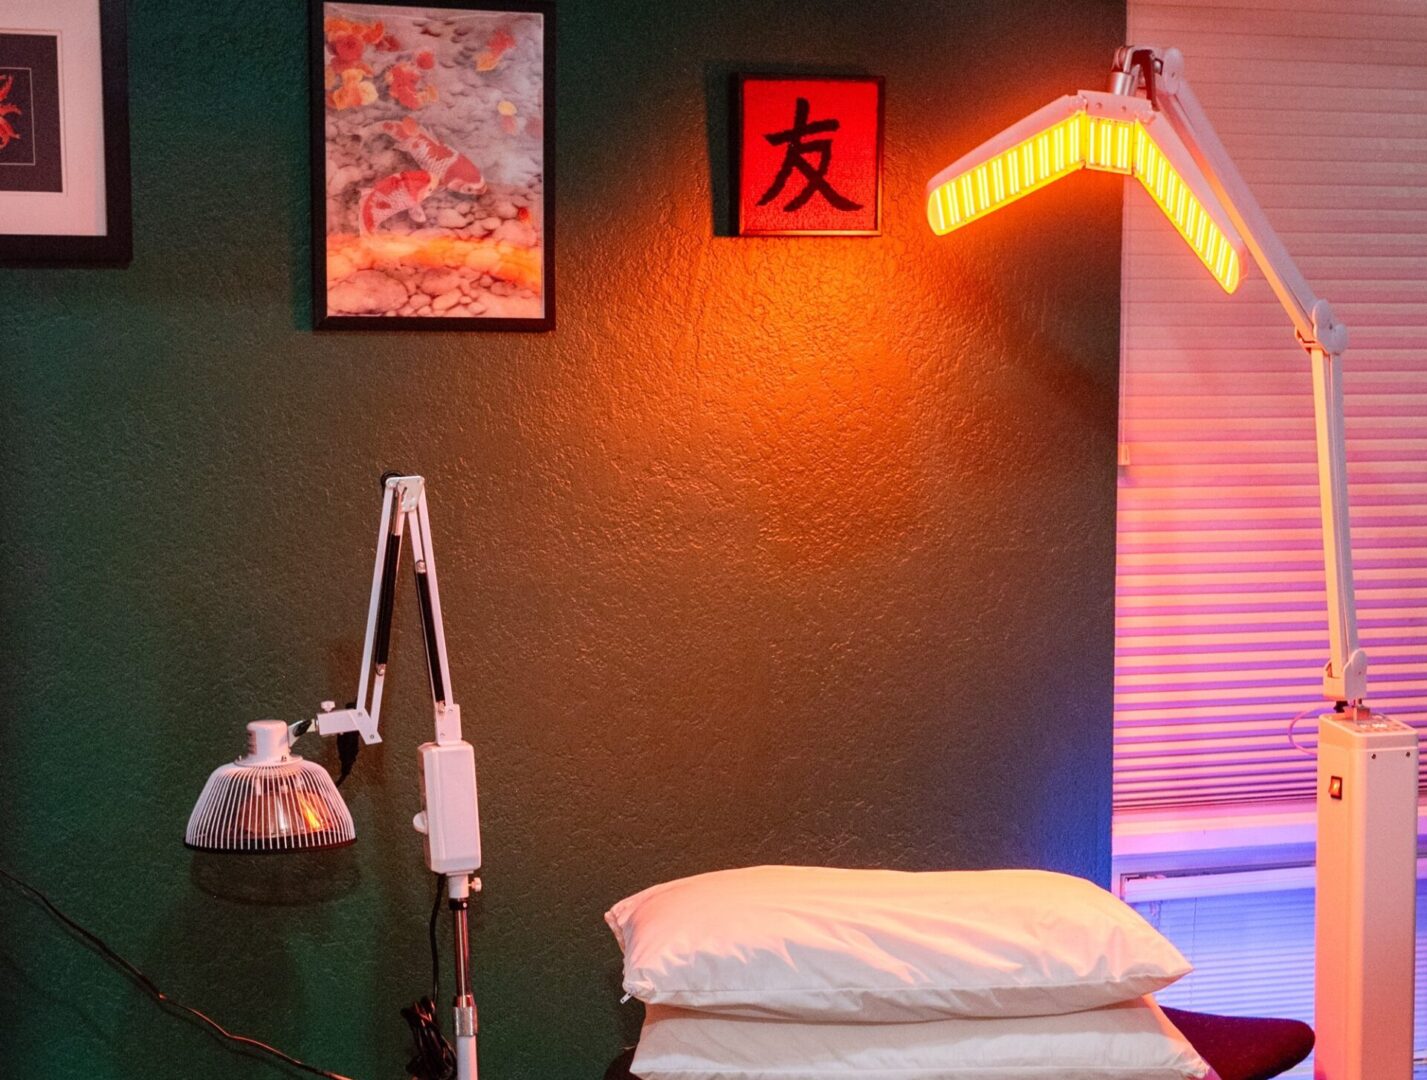 Inside the Green Treatment Room with the Facial Rejuvenation Lamp.